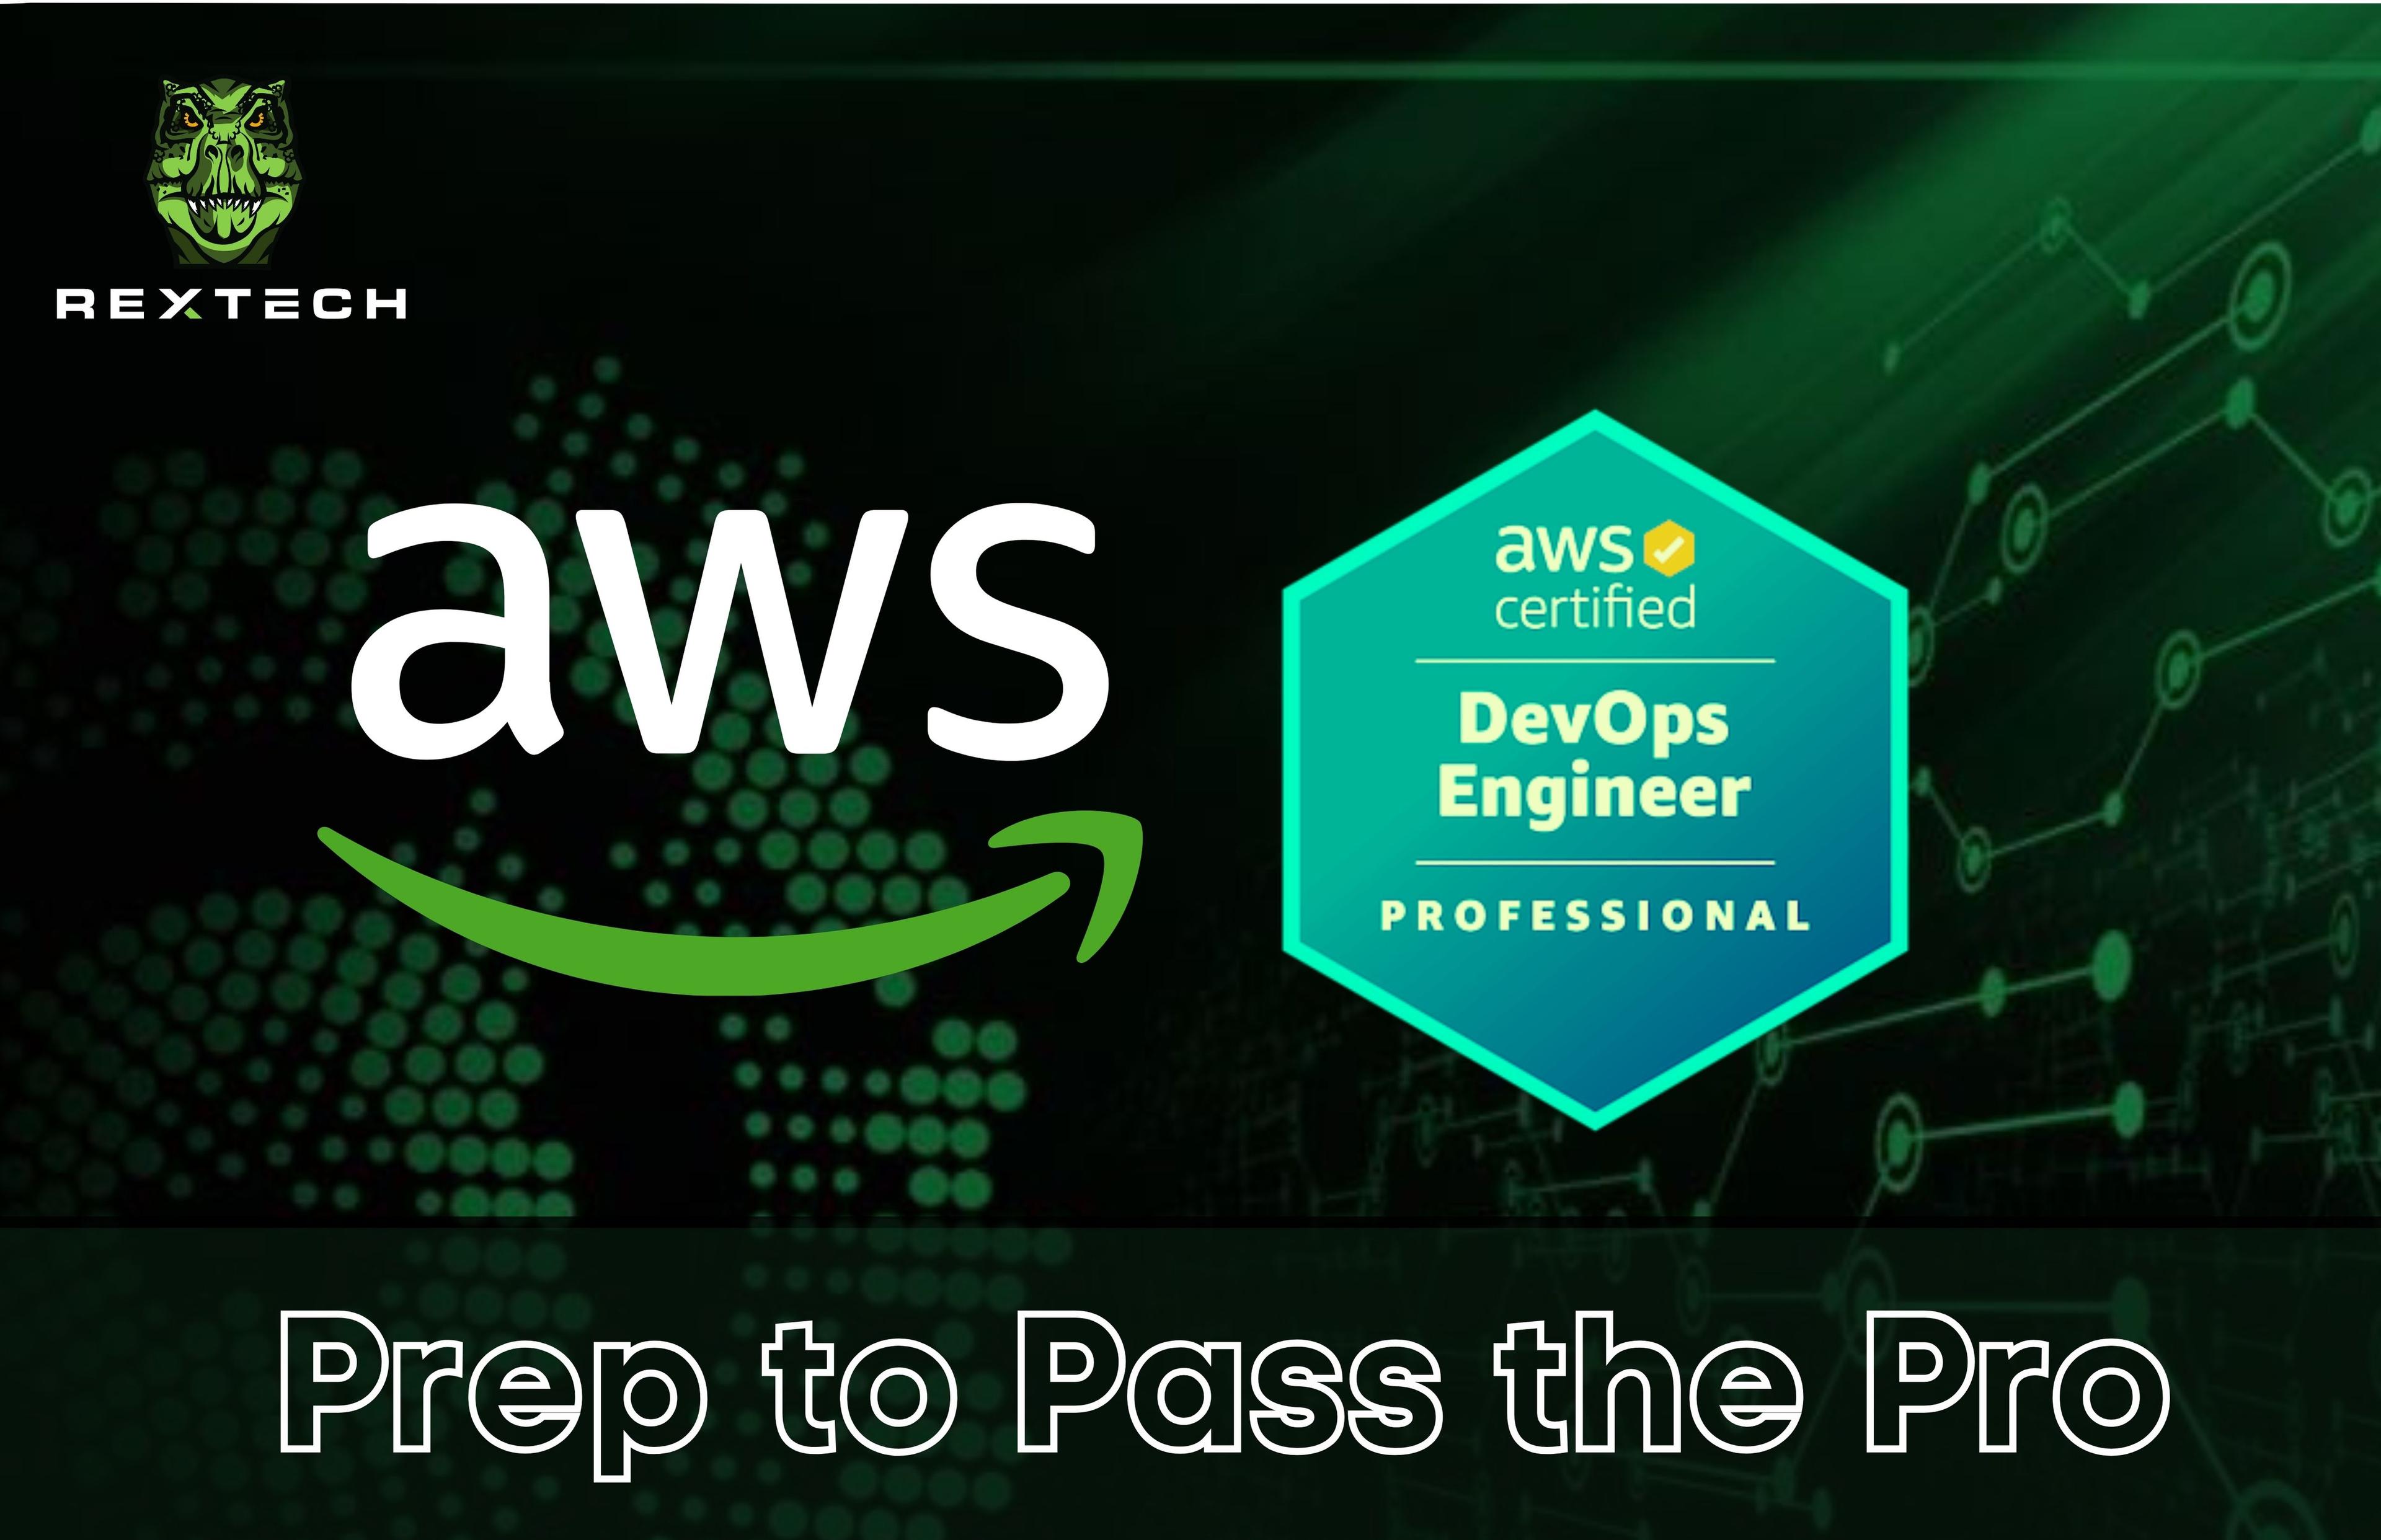 The Complete Package to Pass the AWS DevOps Pro Cert